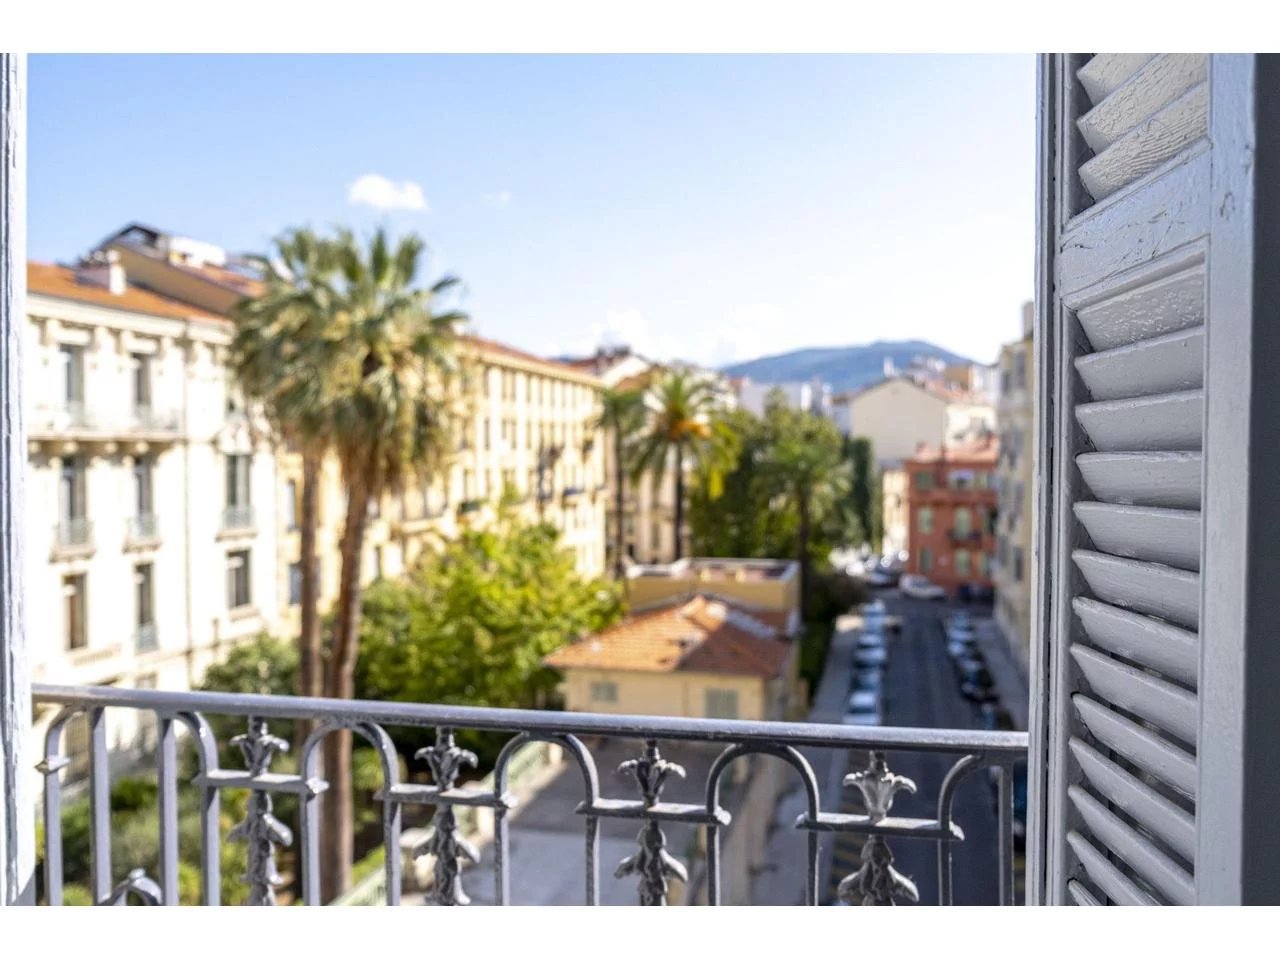 Appartement  3 Rooms 90m2  for sale   765 000 €